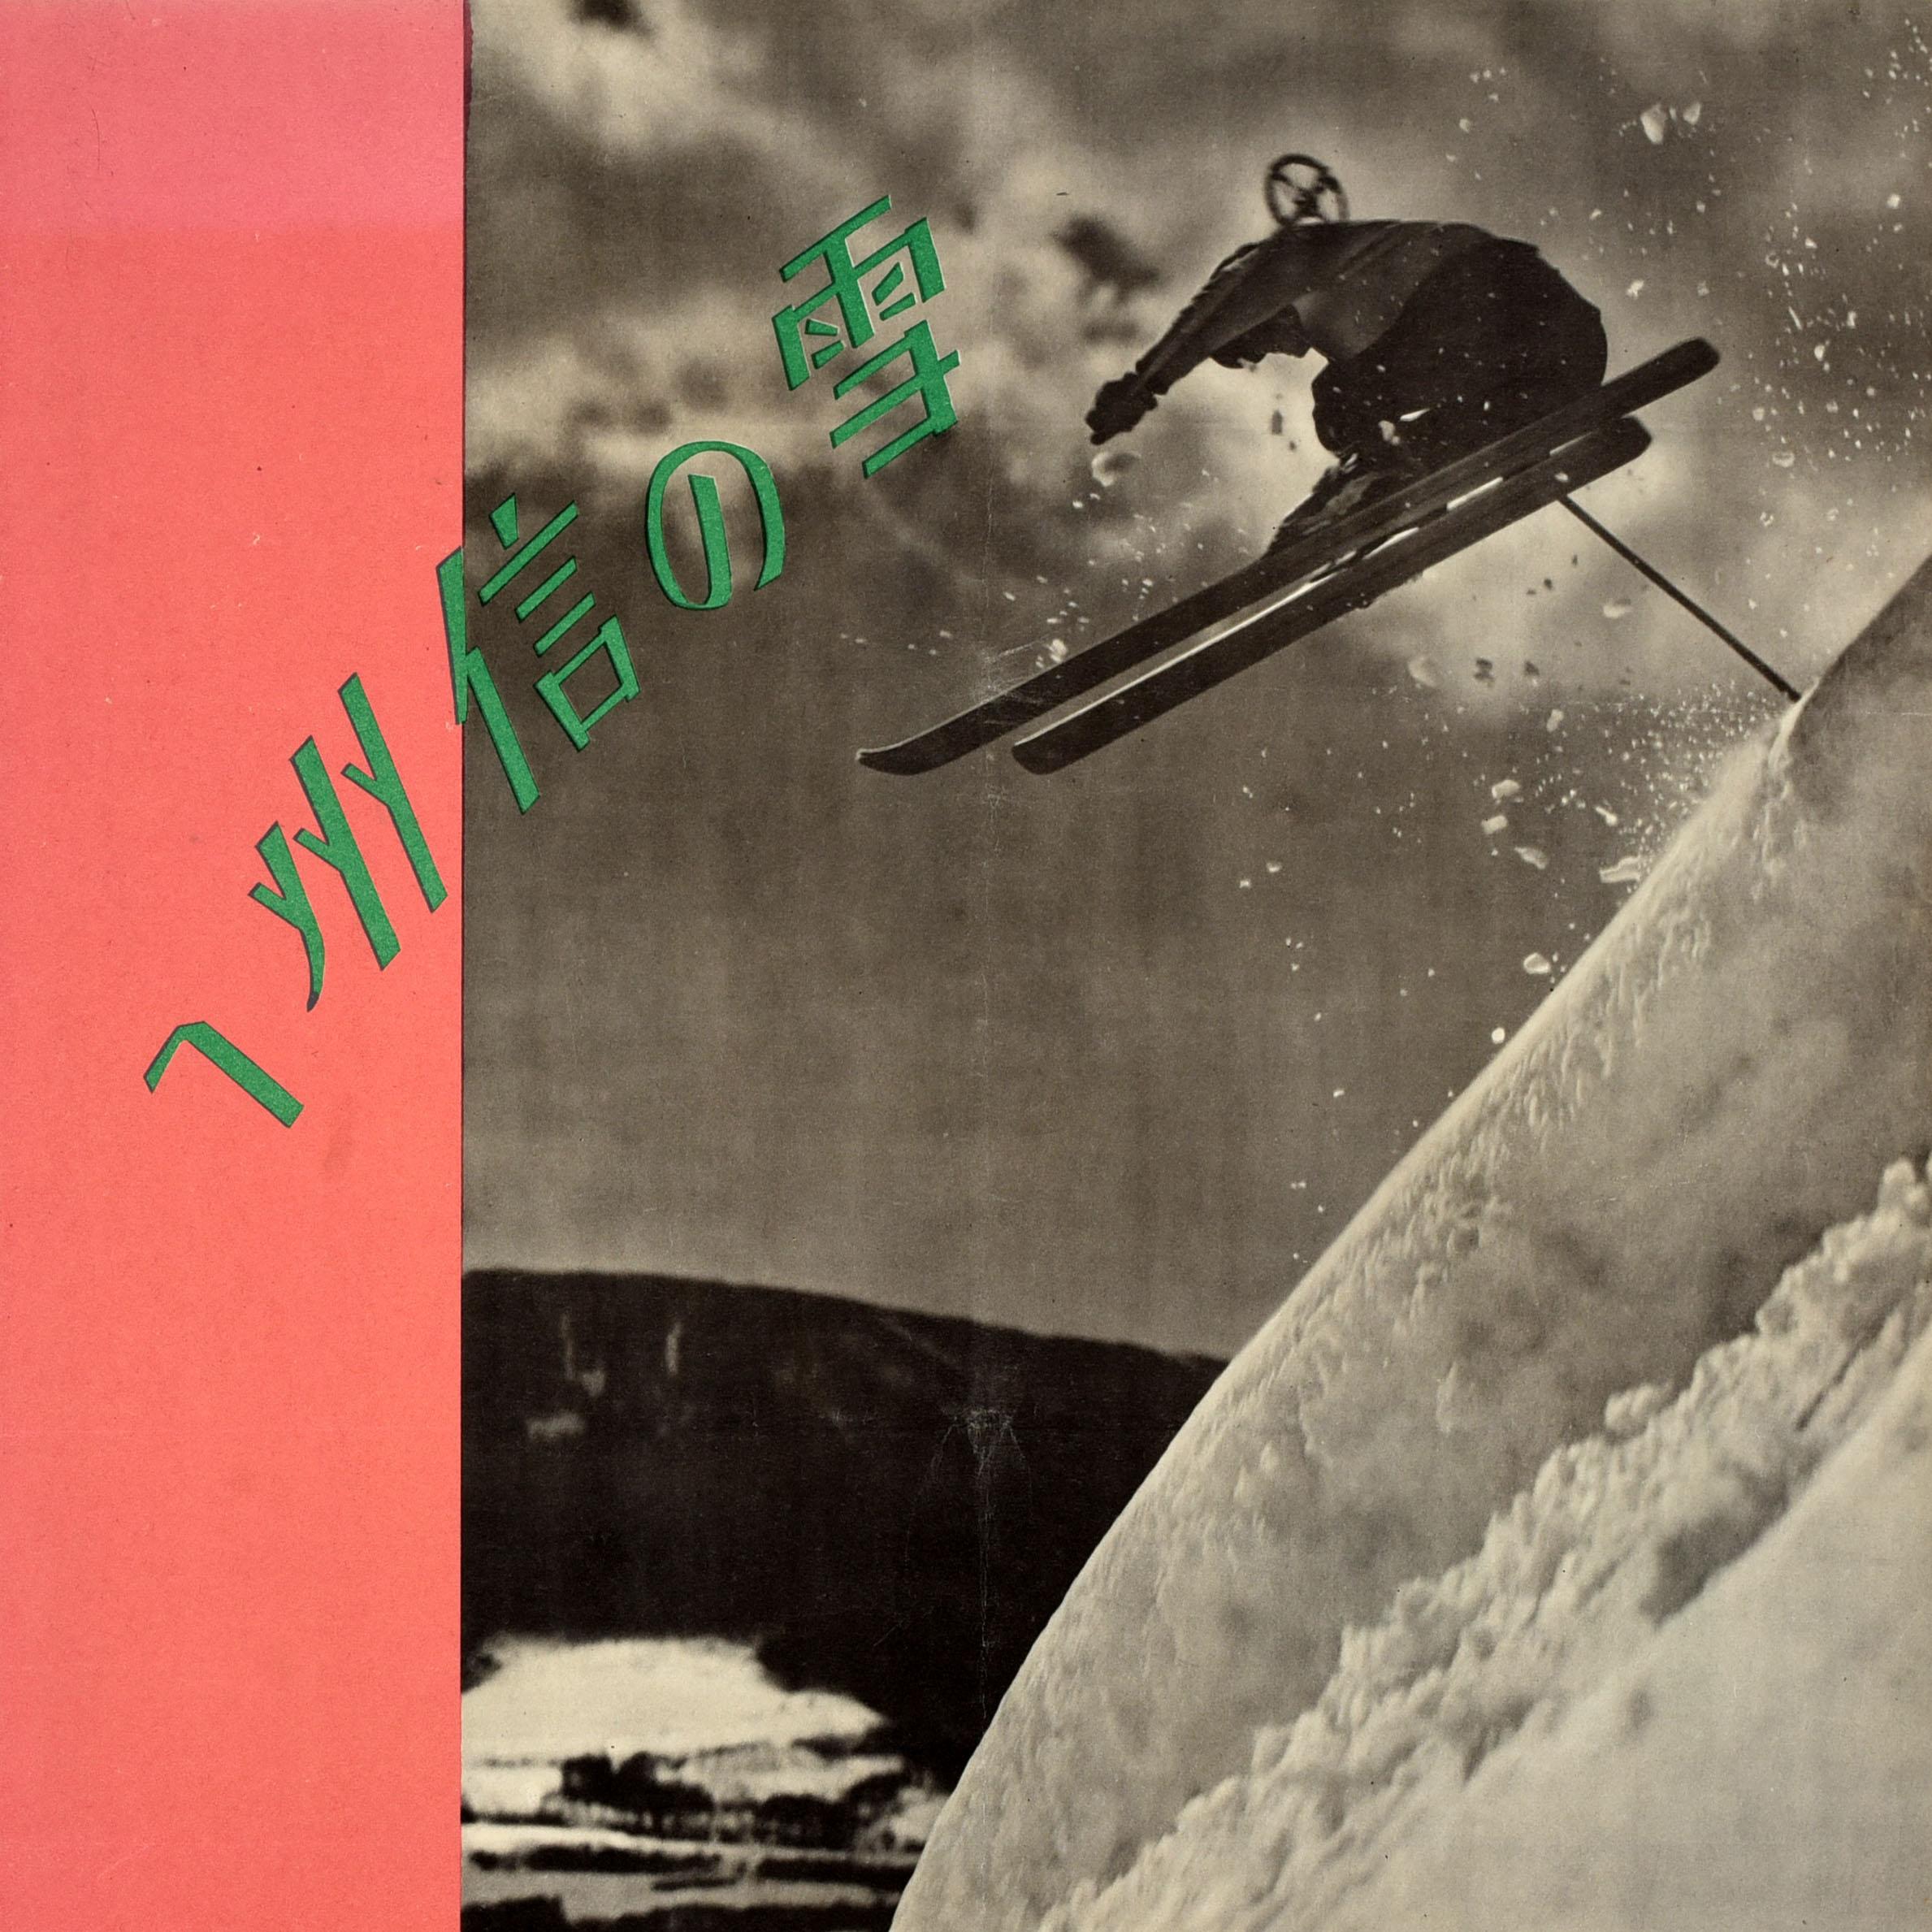 Original vintage skiing and winter sport travel poster for Shinsu / Shinano ski resort in the Nagano Prefecture Japan featuring a black and white photograph of a skier jumping off a snowy slope with the Japanese text curved in green on the side and